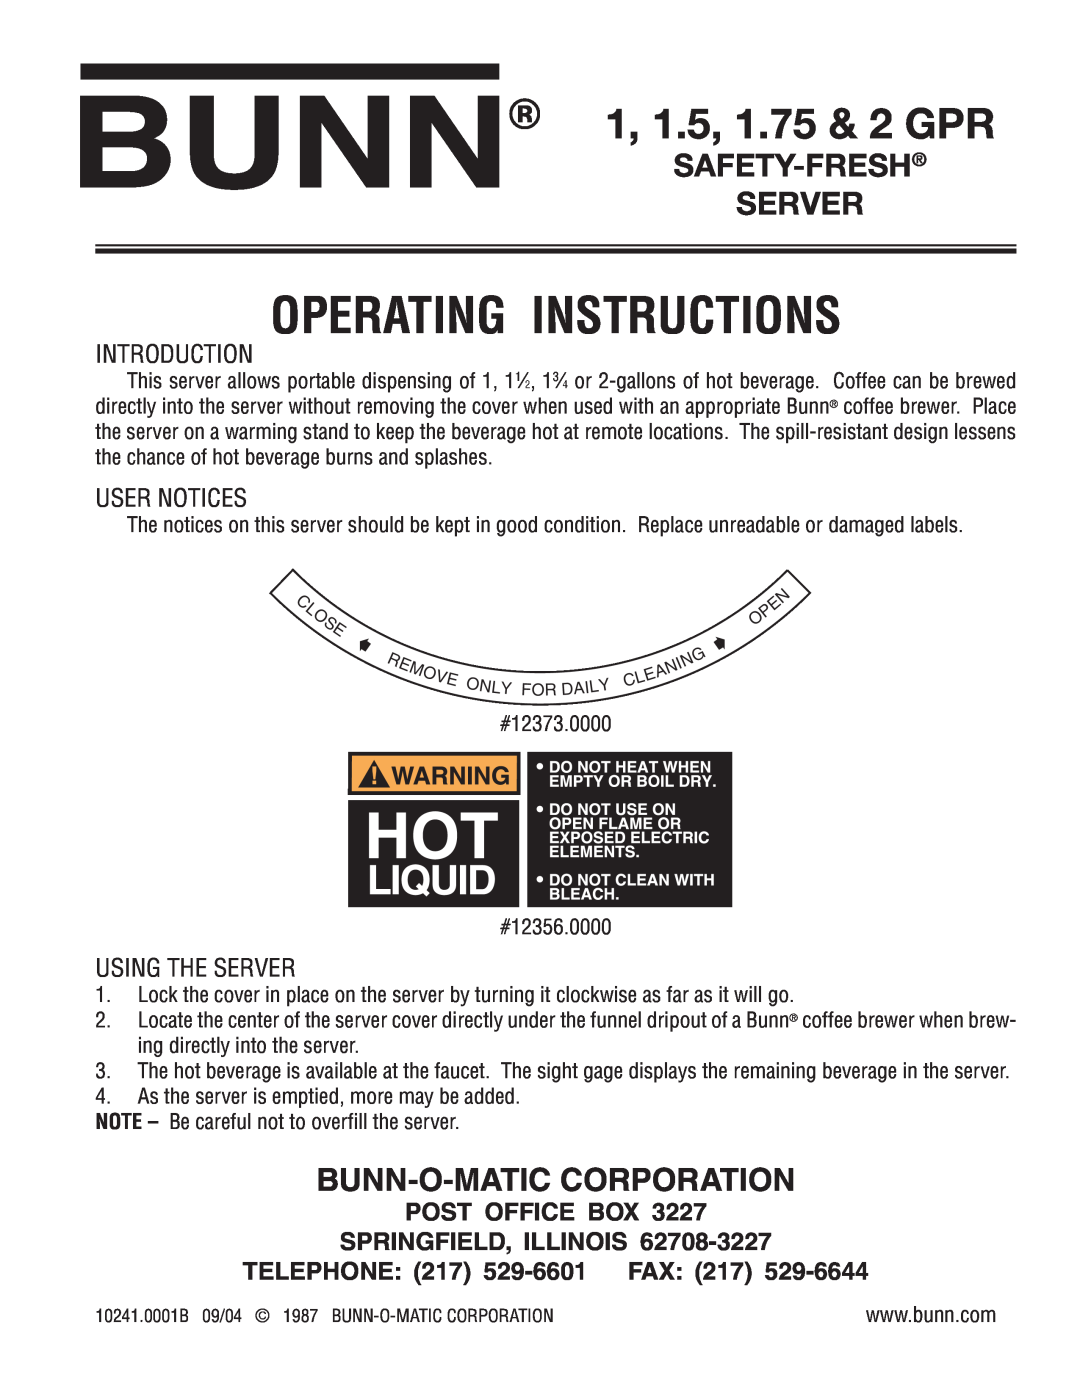 Bunn specifications Ultra Gourmet Ice System, Ultra-1, Model, Agency Listing, Features, Related Products, 7/10 D1.1 